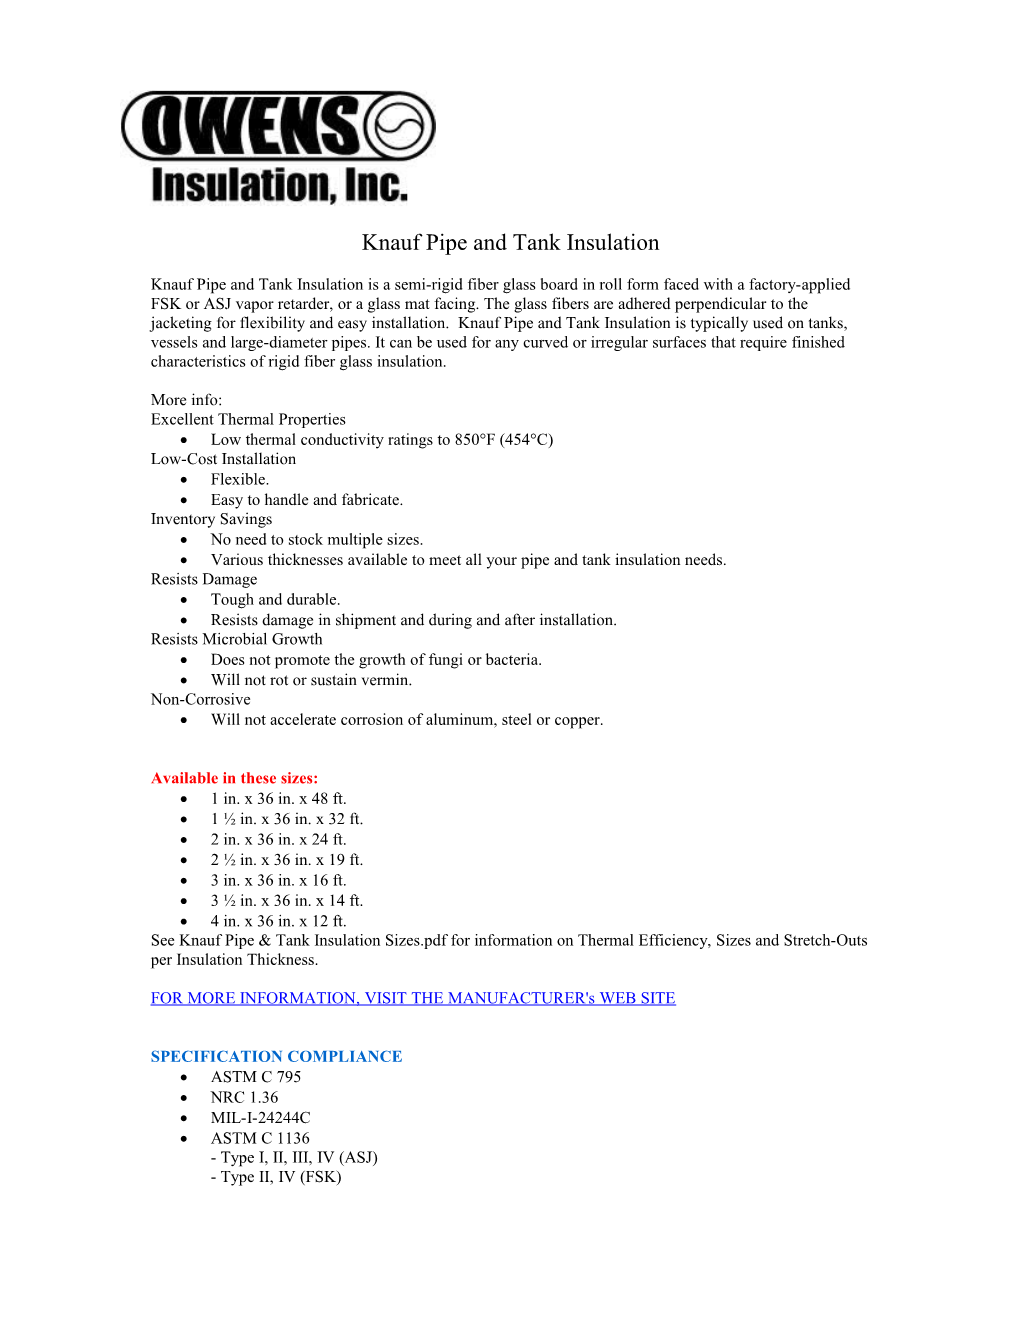 Knauf Pipe and Tank Insulation